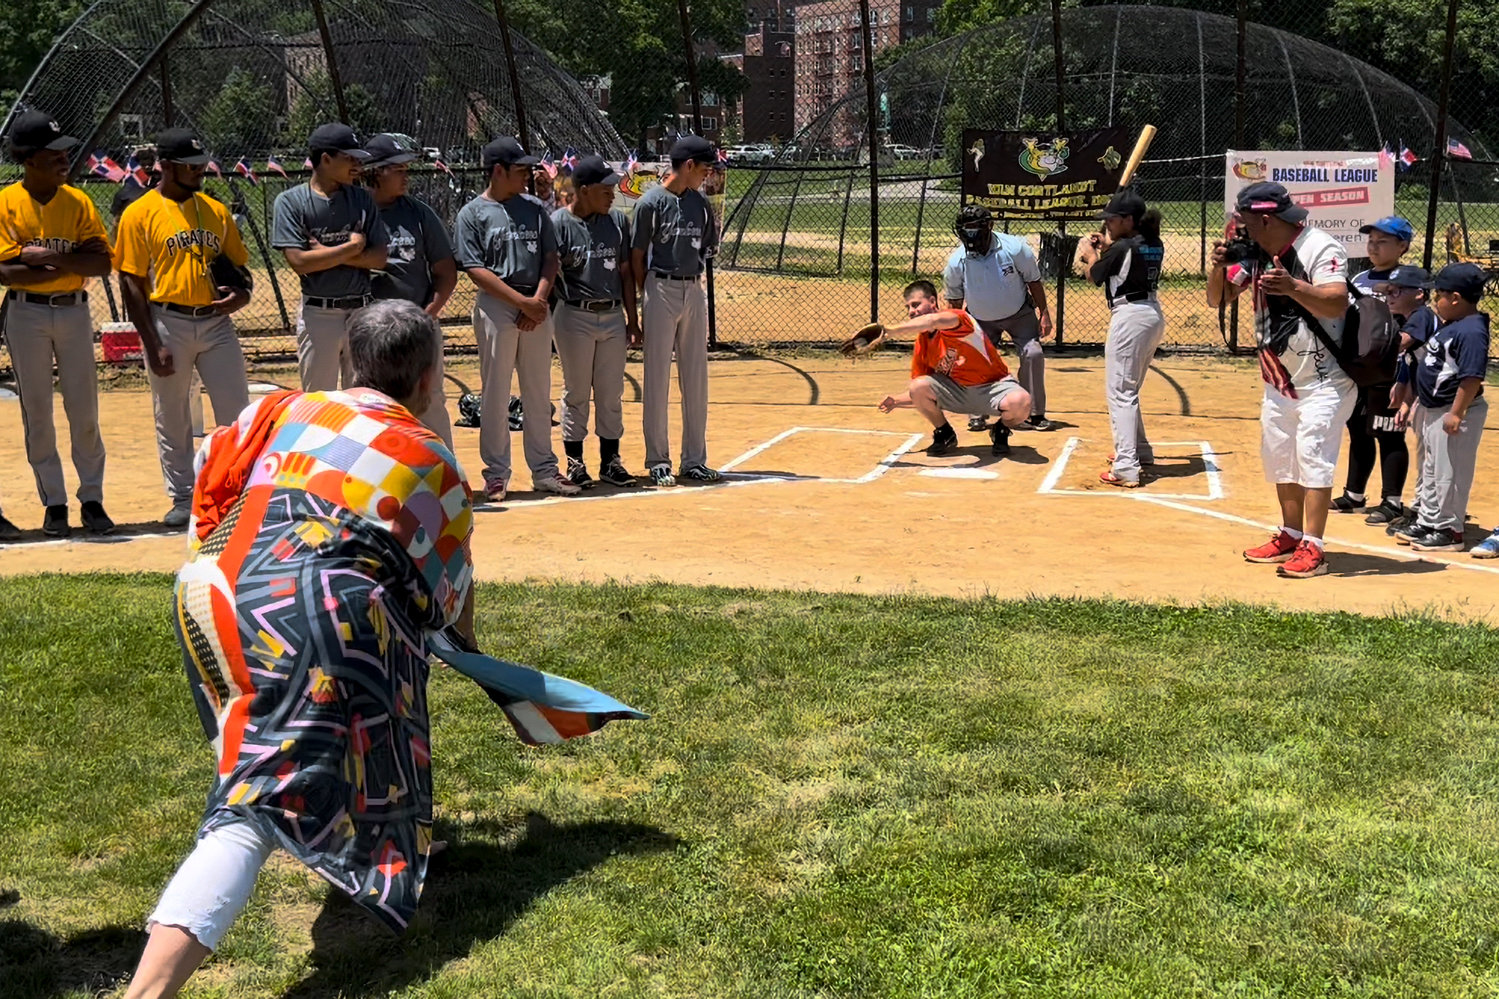 Deb Derella Cheren threw out the first pitch for opening day of the Van Cortlandt Park Baseball League on Saturday, June 4. A GoFundMe set up in her late husband Ivan’s honor is helping local baseball families afford the costs of travel, equipment and private lessons.